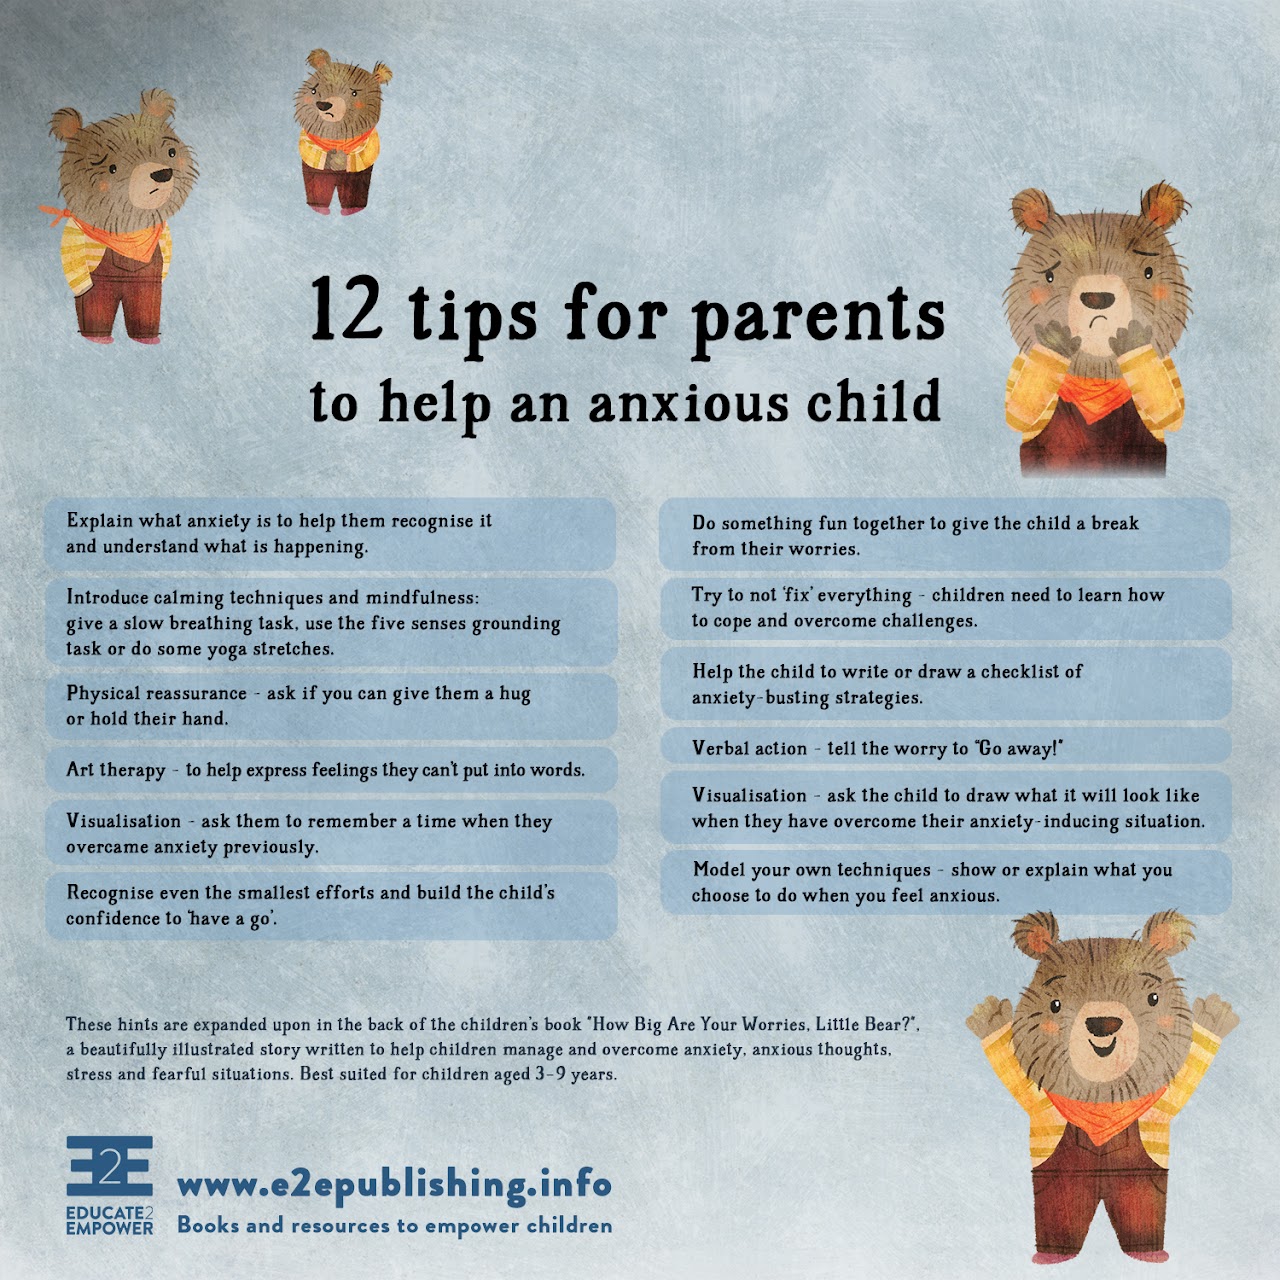 12 tips for parents with anxious children flyer